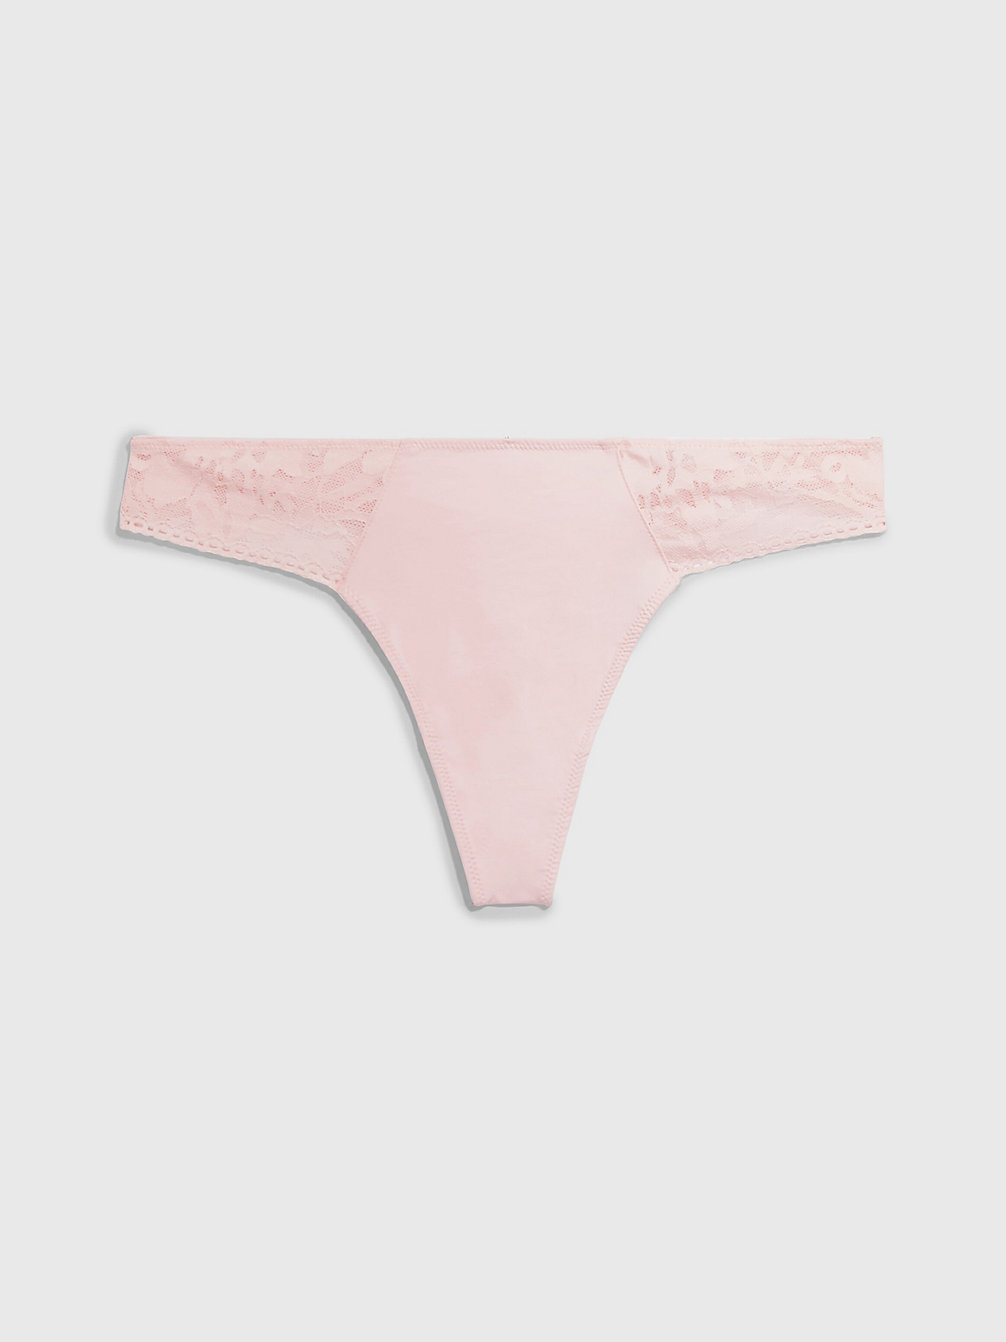 Tanga - Ultra Soft Lace > NYMPTHÂ€™S THIGH > undefined mujer > Calvin Klein